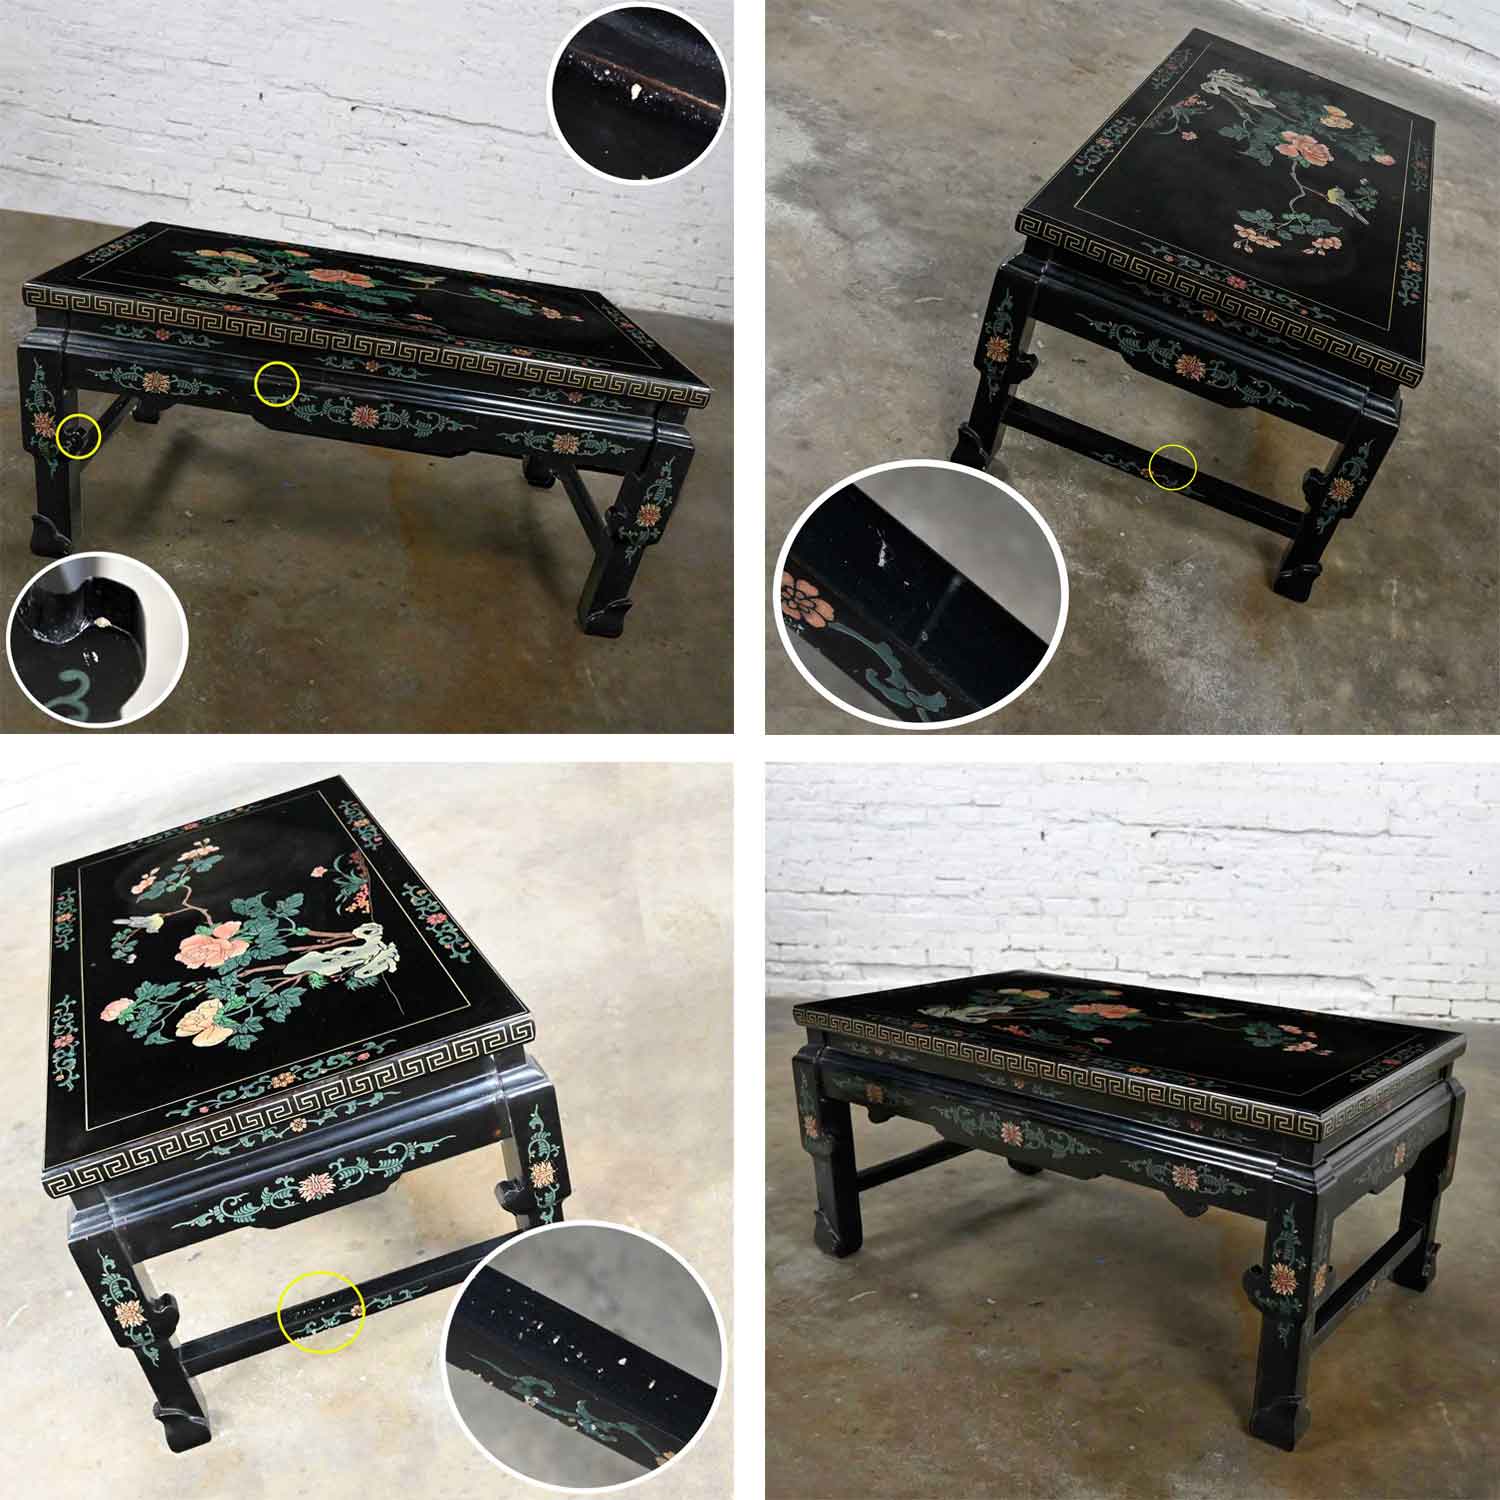 Vintage Chinoiserie Asian Folding Coffee Table Black Lacquered Carved Gold Meander & Floral Design